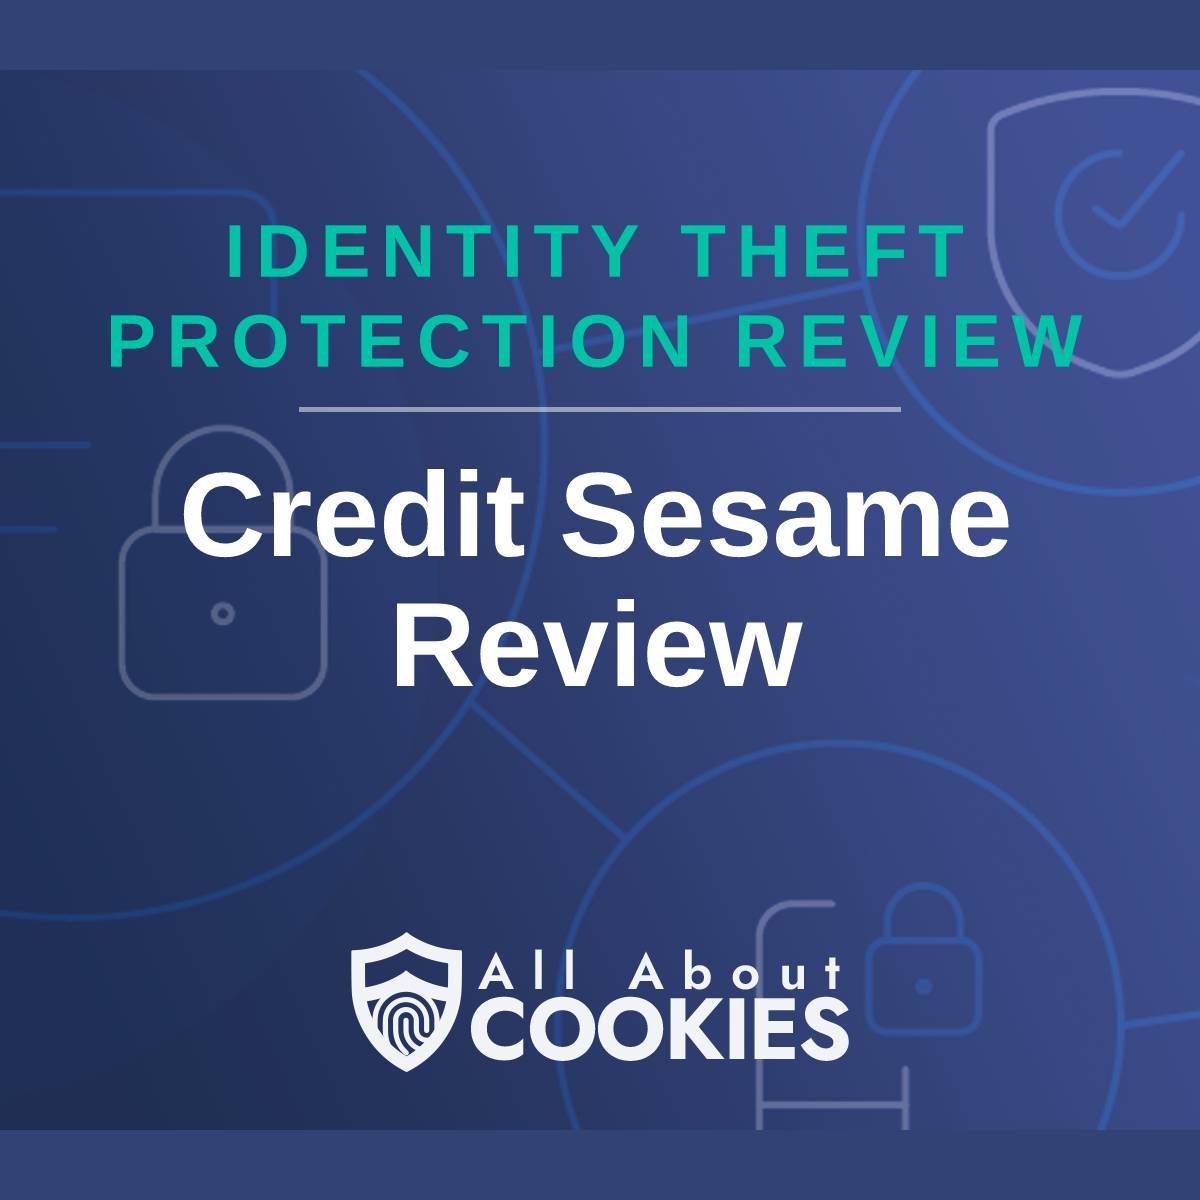 A blue background with images of locks and shields with the text &quot;Identity Theft Protection Review Credit Sesame Review&quot; and the All About Cookies logo. 